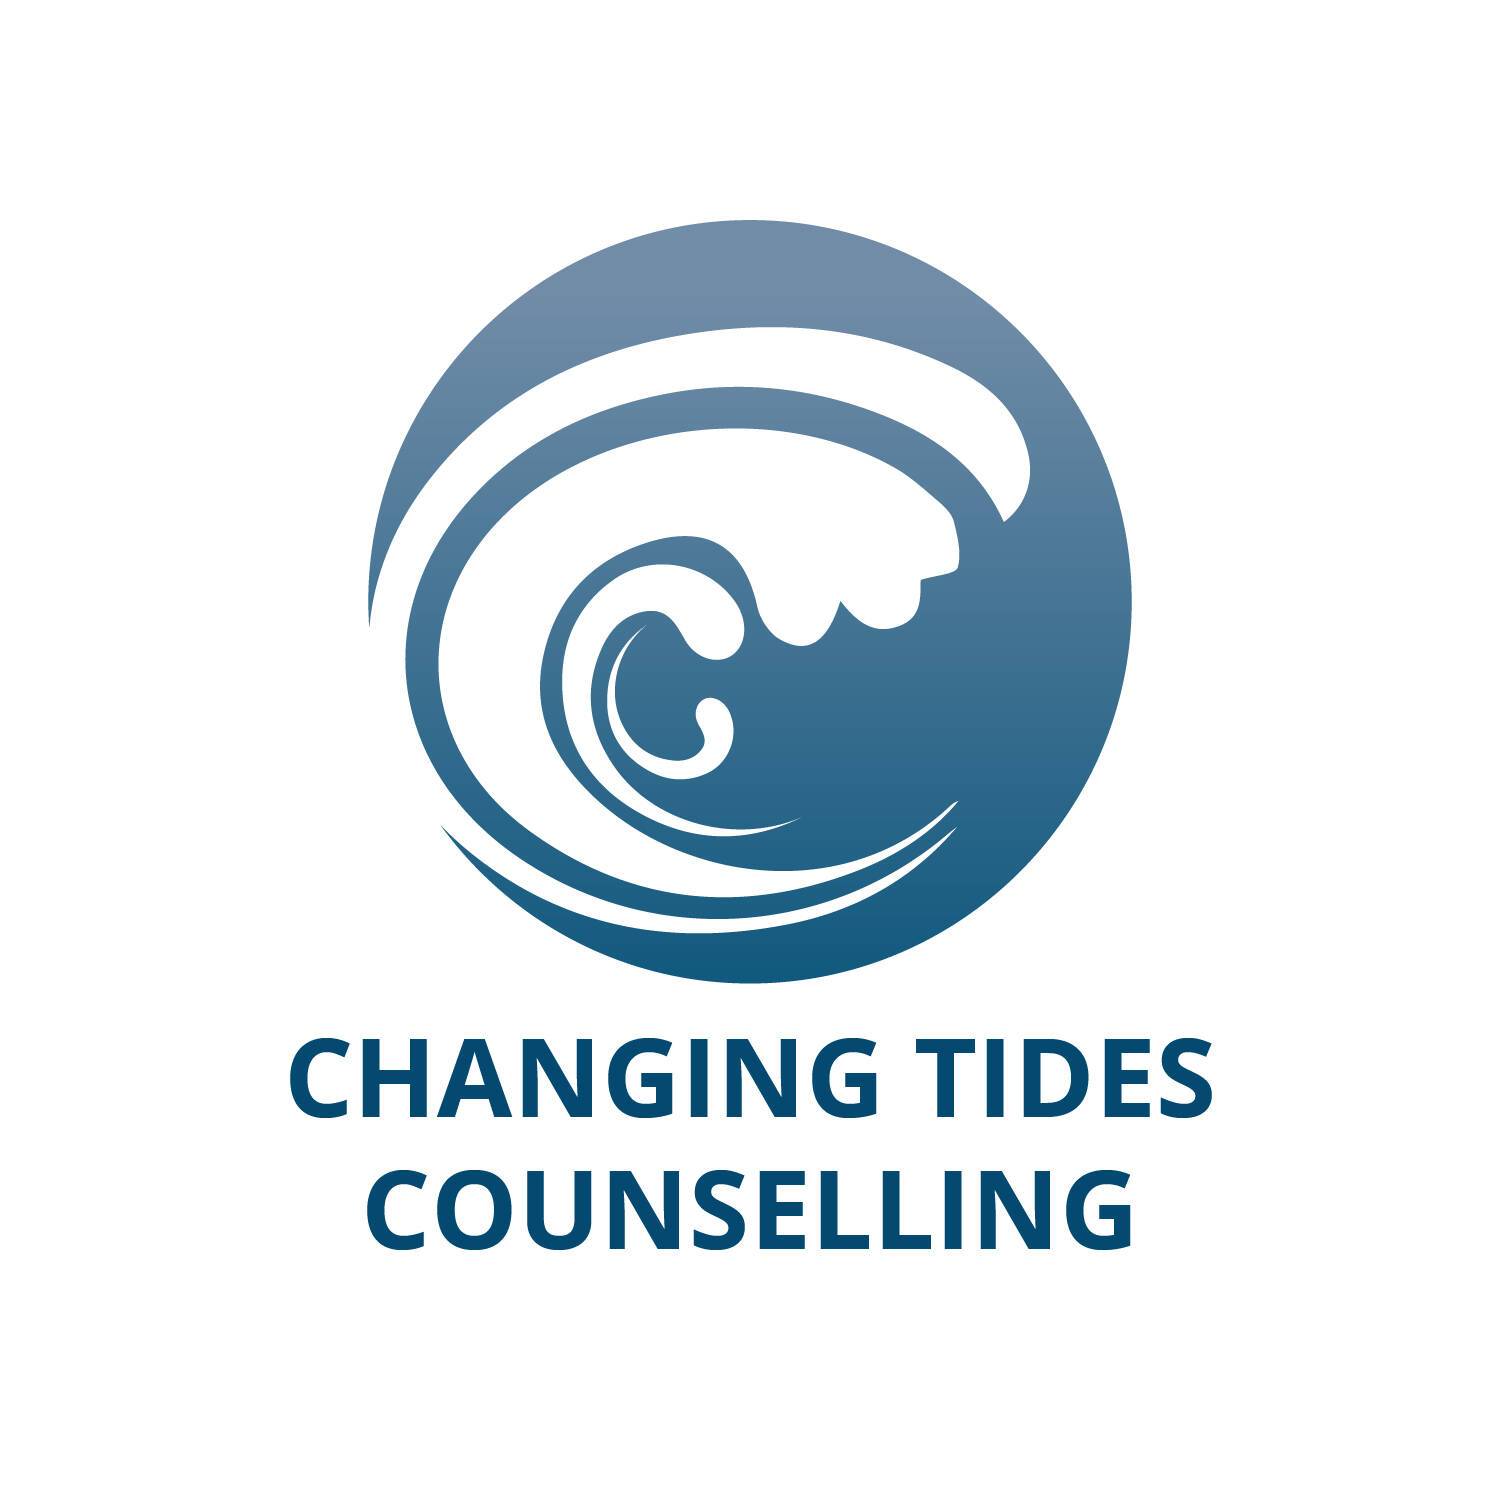 Changing Tides Counselling